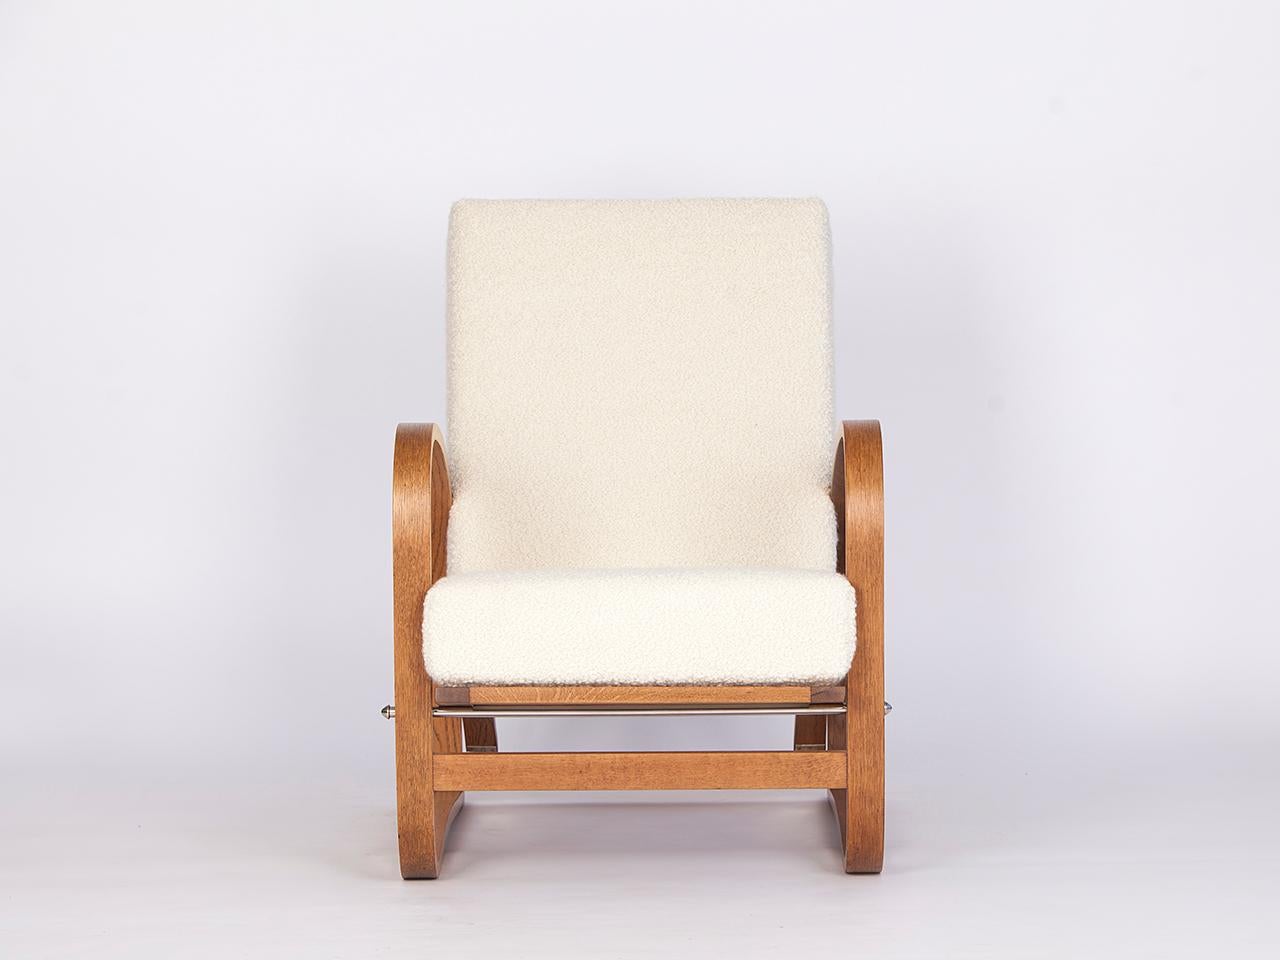 This H-70 armchair was designed by Jindrich Halabala and produced by Spojene UP zavody, circa 1930. The backrest and seat can be put in three different positions. The wooden parts restored. Covered with an Italian fabric made of soft wool and alpaca